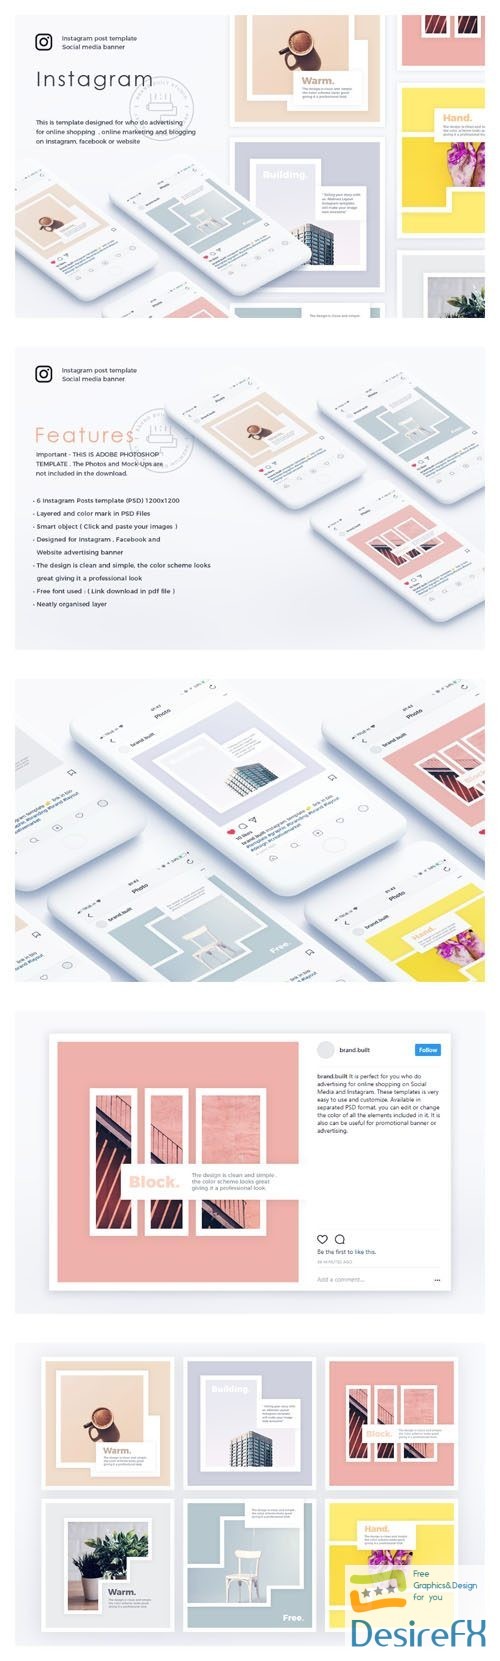 Abstract Instagram Layout PSD Templates